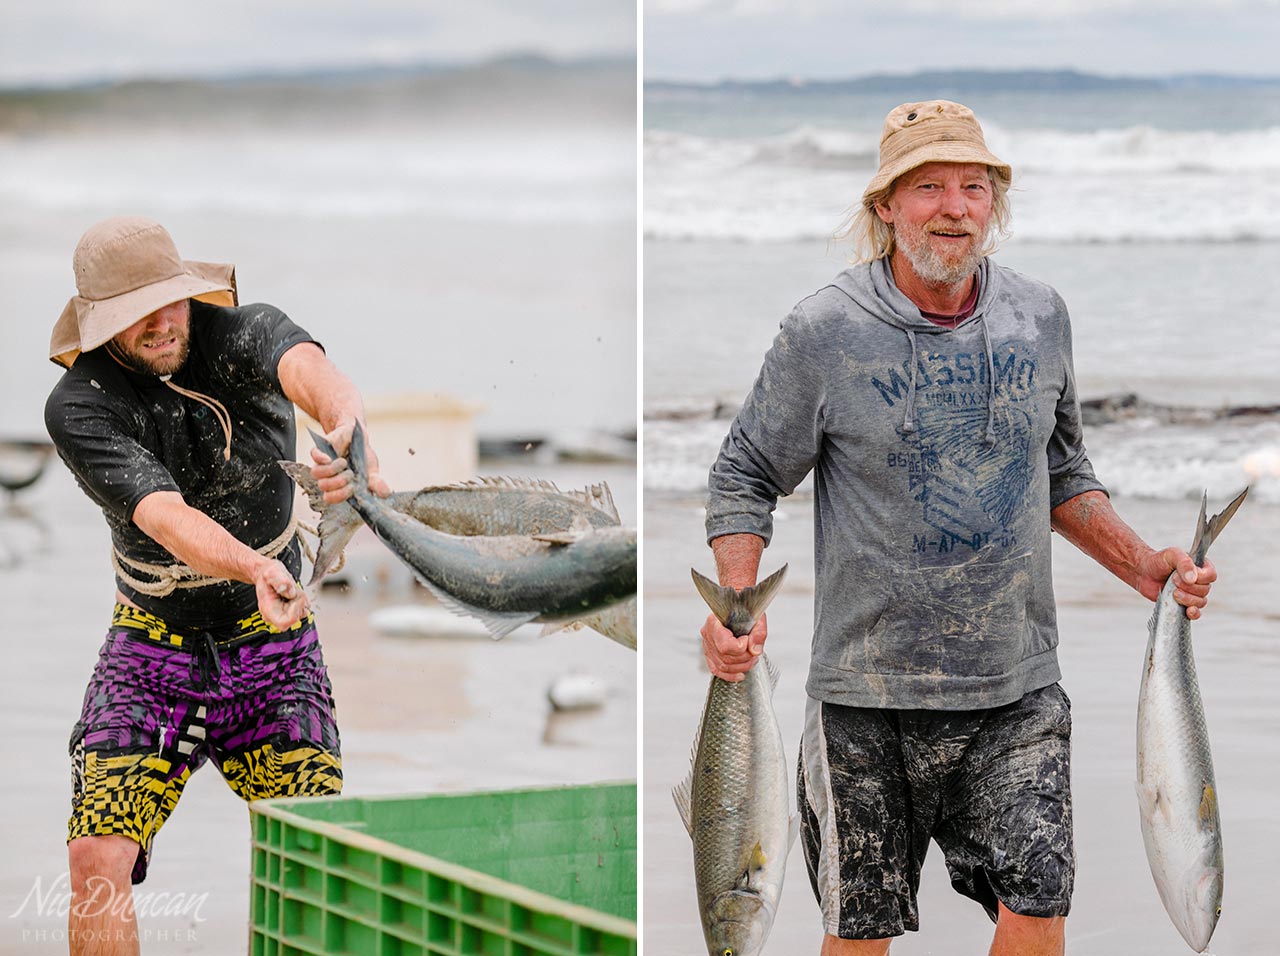 Passers-by get involved with the team of salmon fishermen